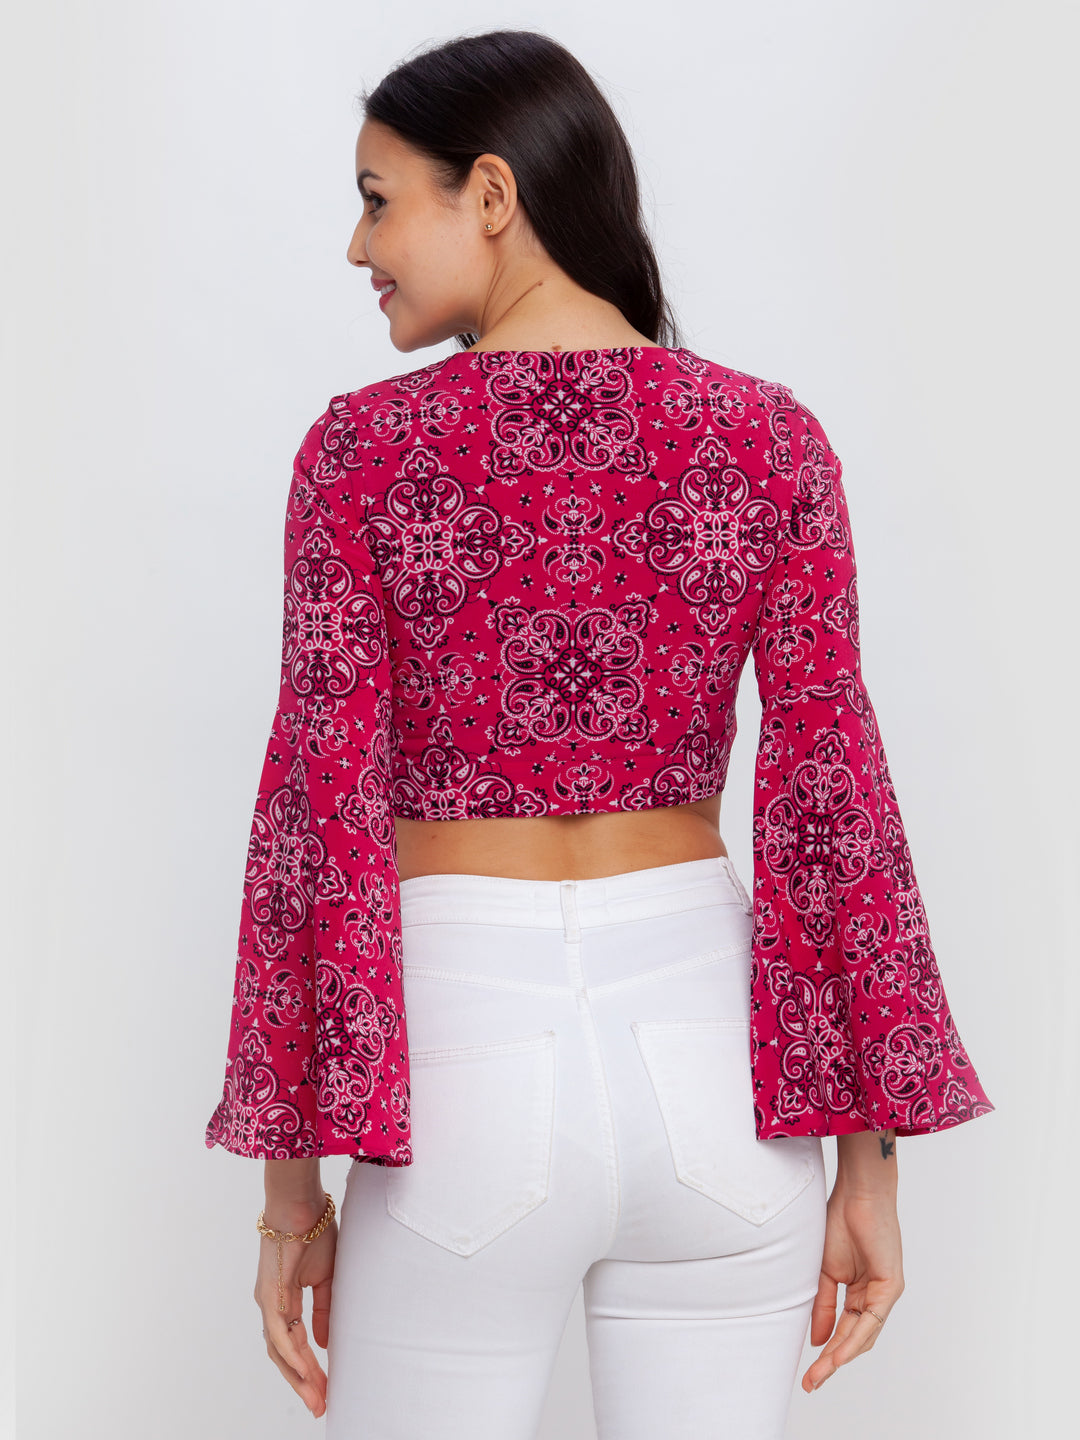 Pink Printed Top For Women